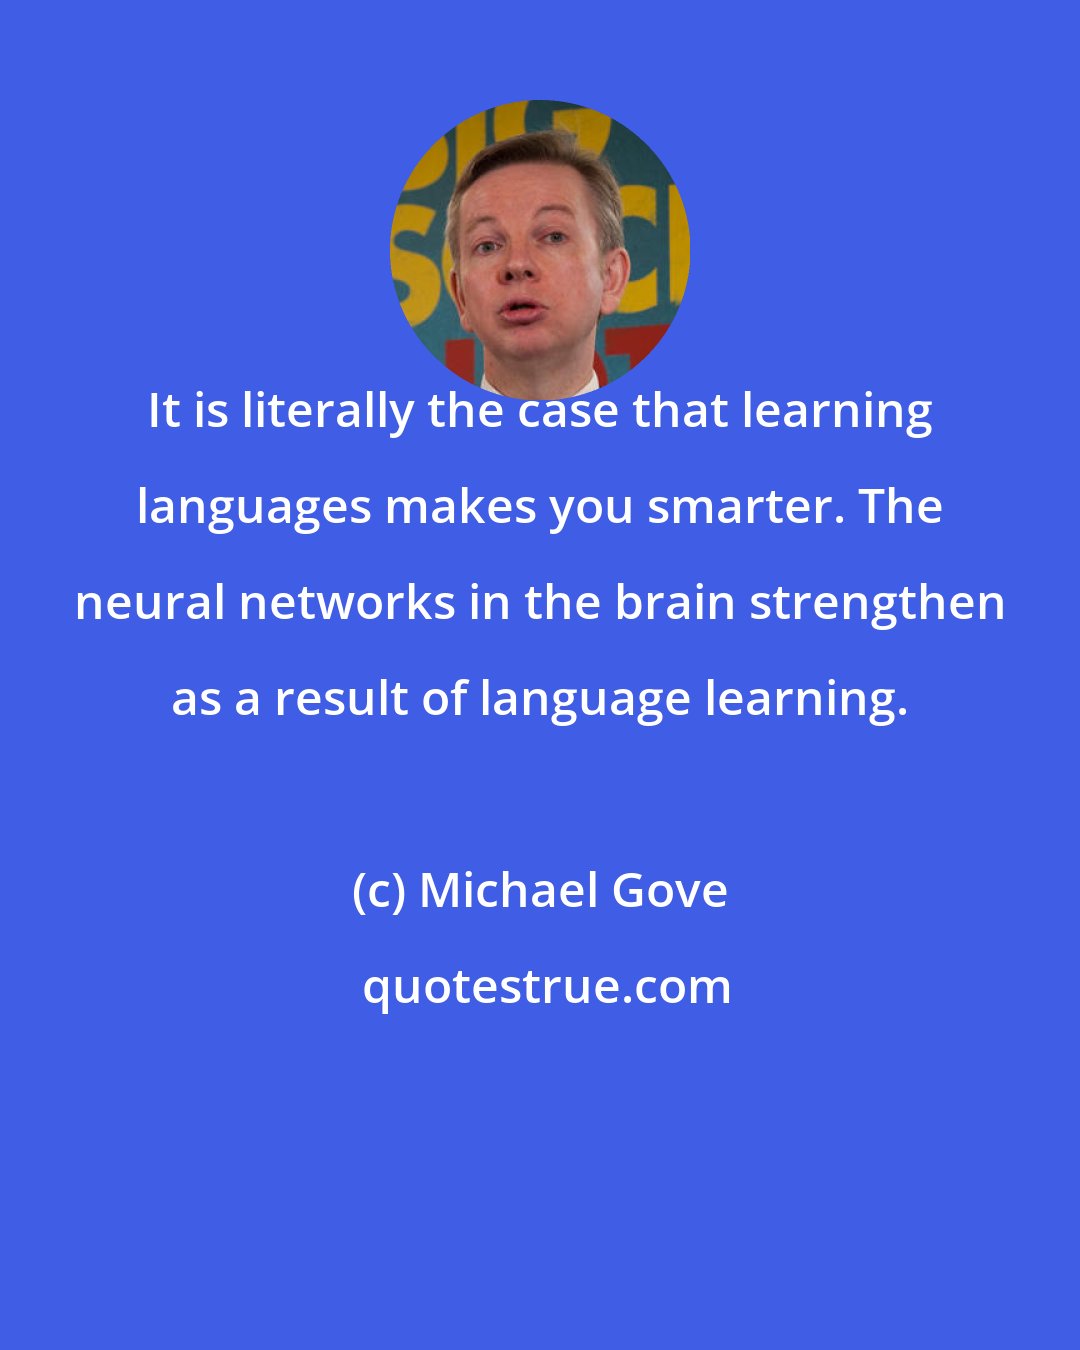 Michael Gove: It is literally the case that learning languages makes you smarter. The neural networks in the brain strengthen as a result of language learning.